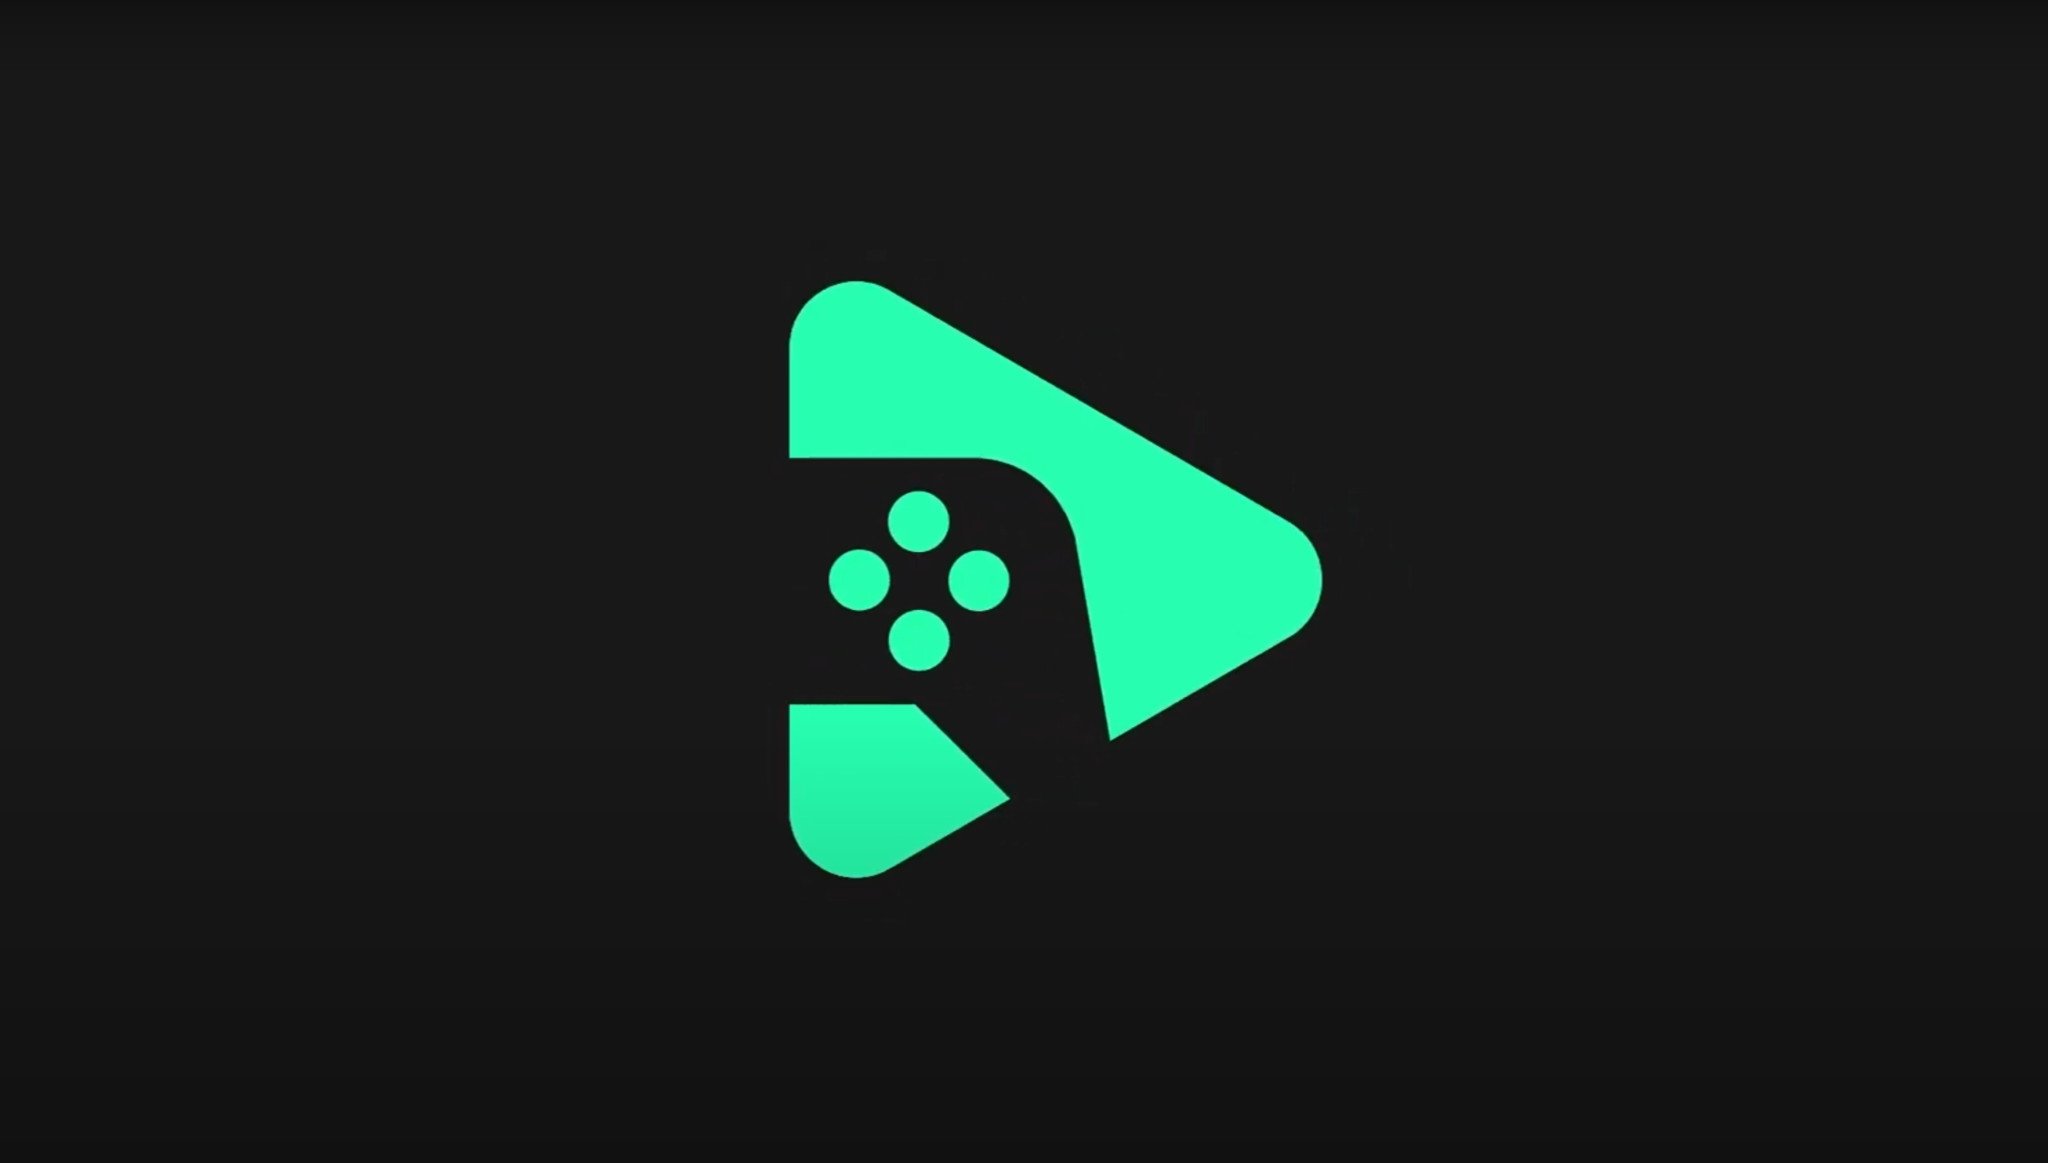 You can now sign-up to join the first beta for Google Play Games on PCs